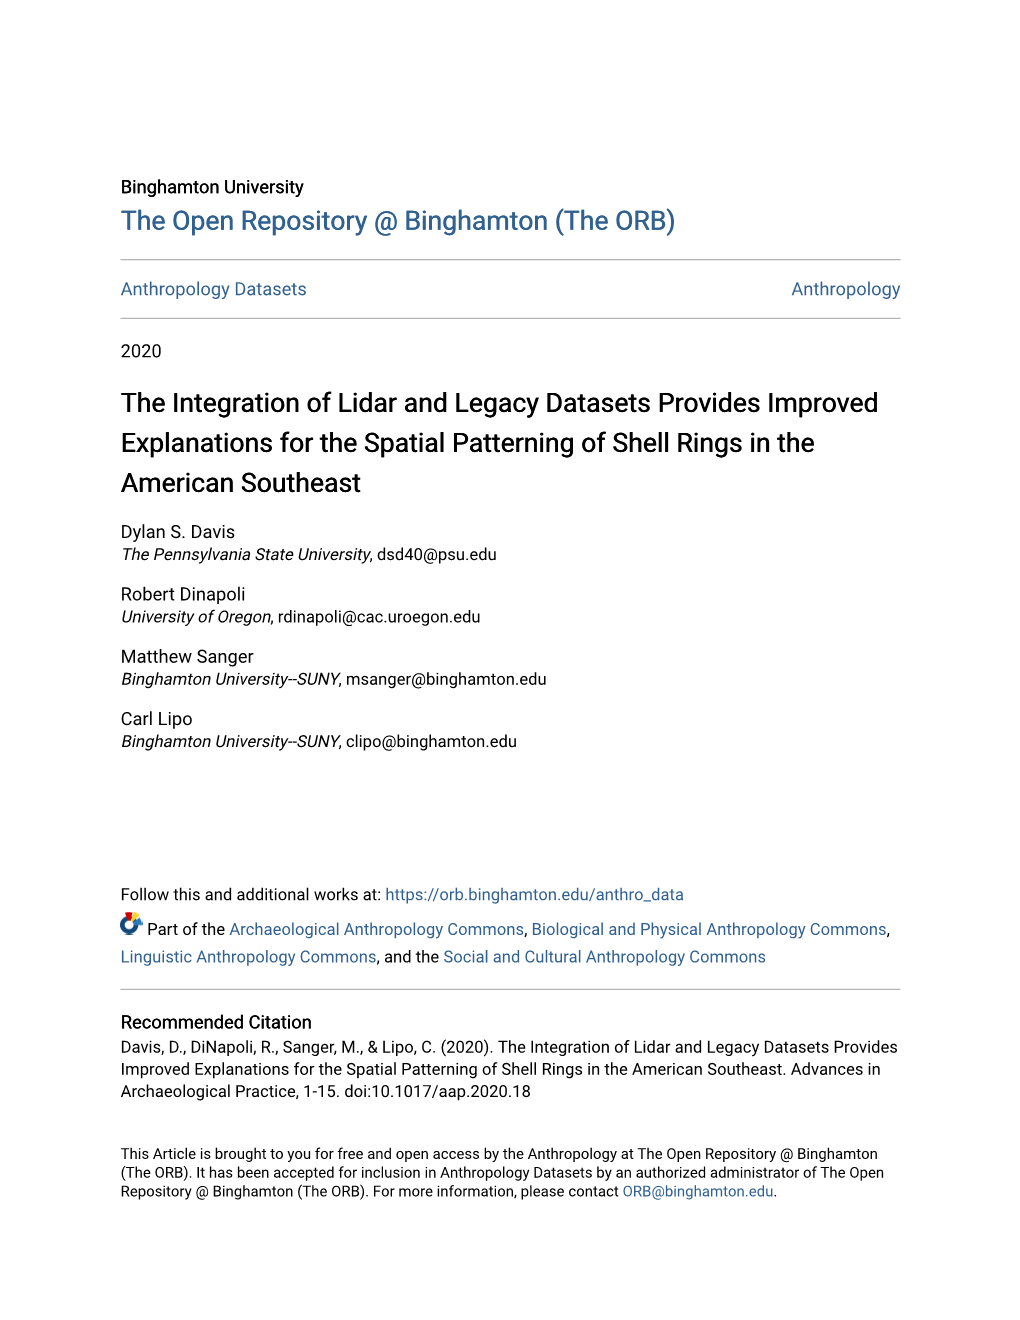 The Integration of Lidar and Legacy Datasets Provides Improved Explanations for the Spatial Patterning of Shell Rings in the American Southeast